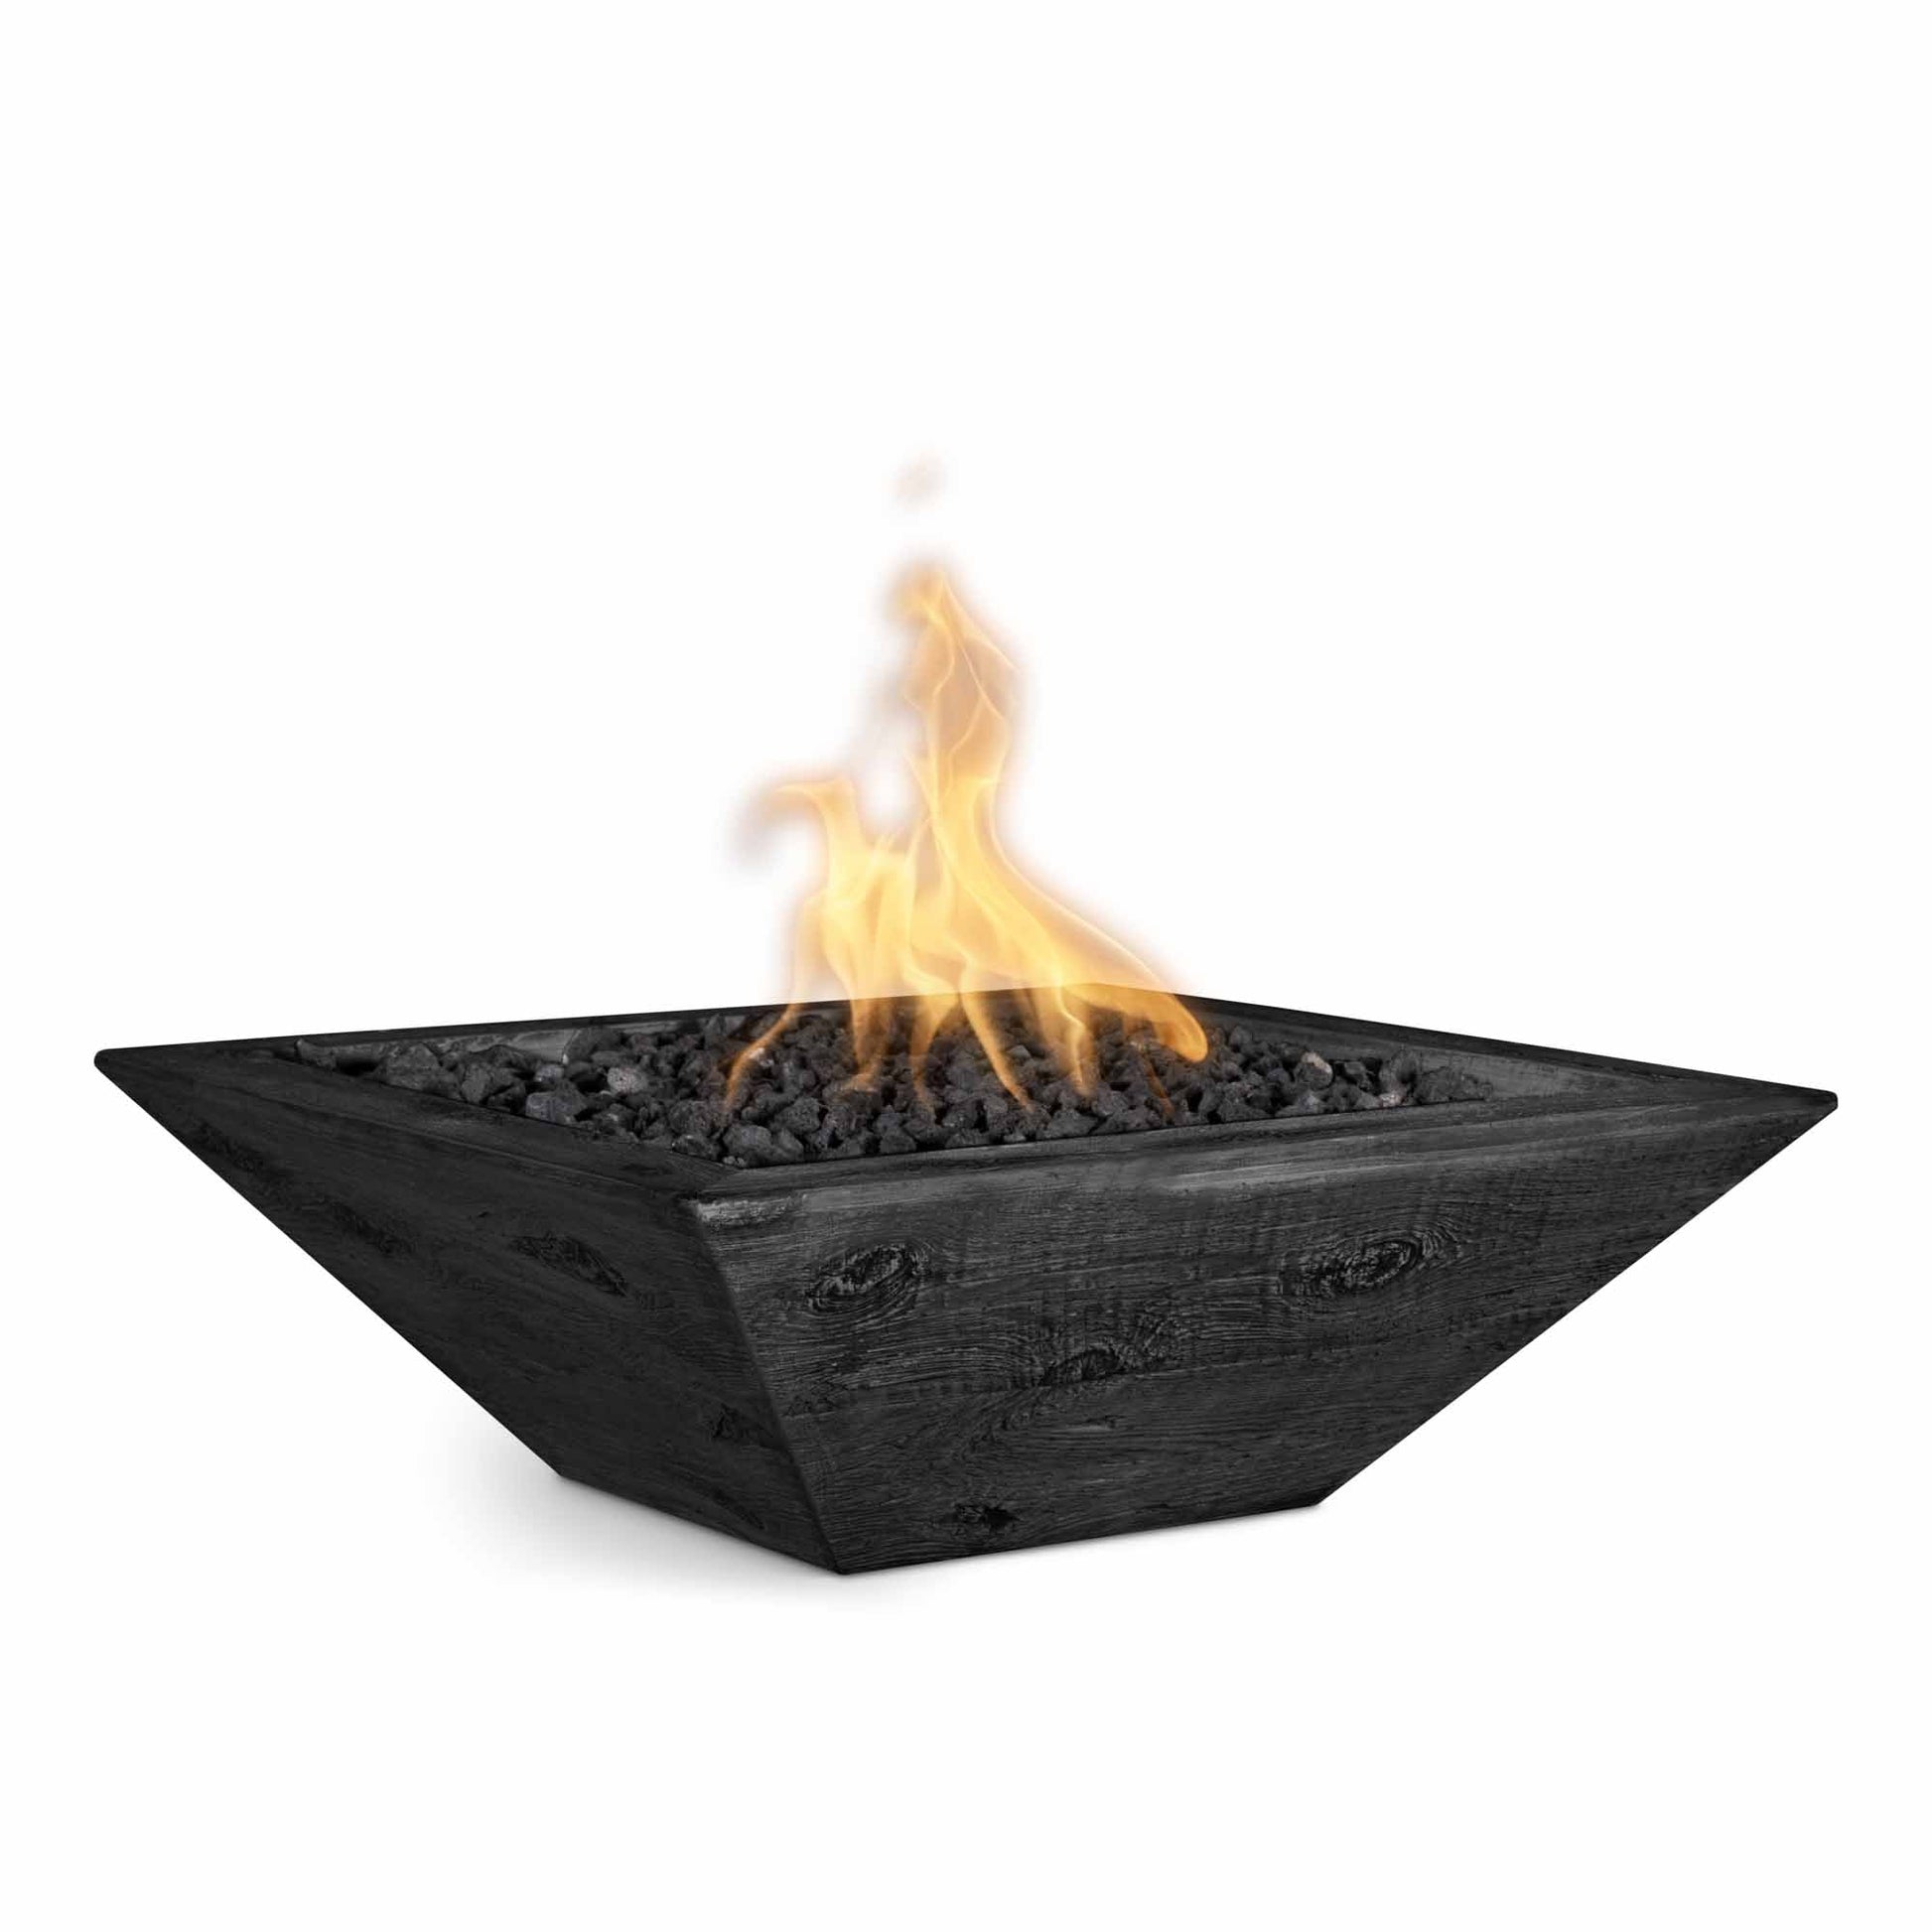 The Outdoor Plus Square Maya 30" Ebony Wood Grain Liquid Propane Fire Bowl with Match Lit with Flame Sense Ignition